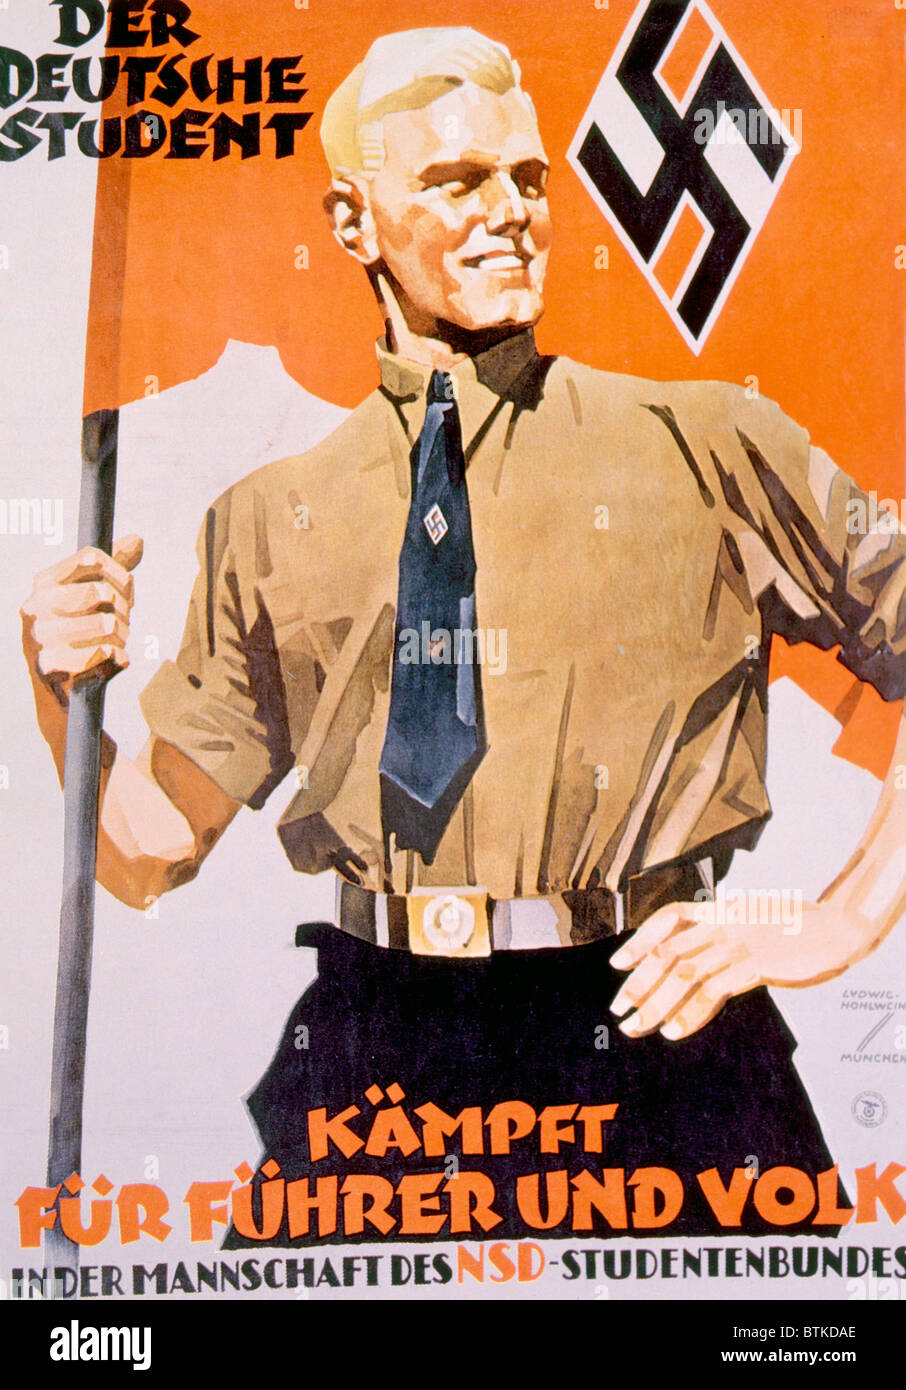 The German student fights for Fuhrer and people in the body of the National Student Union, Nazi poster, ca. 1939 Stock Photo